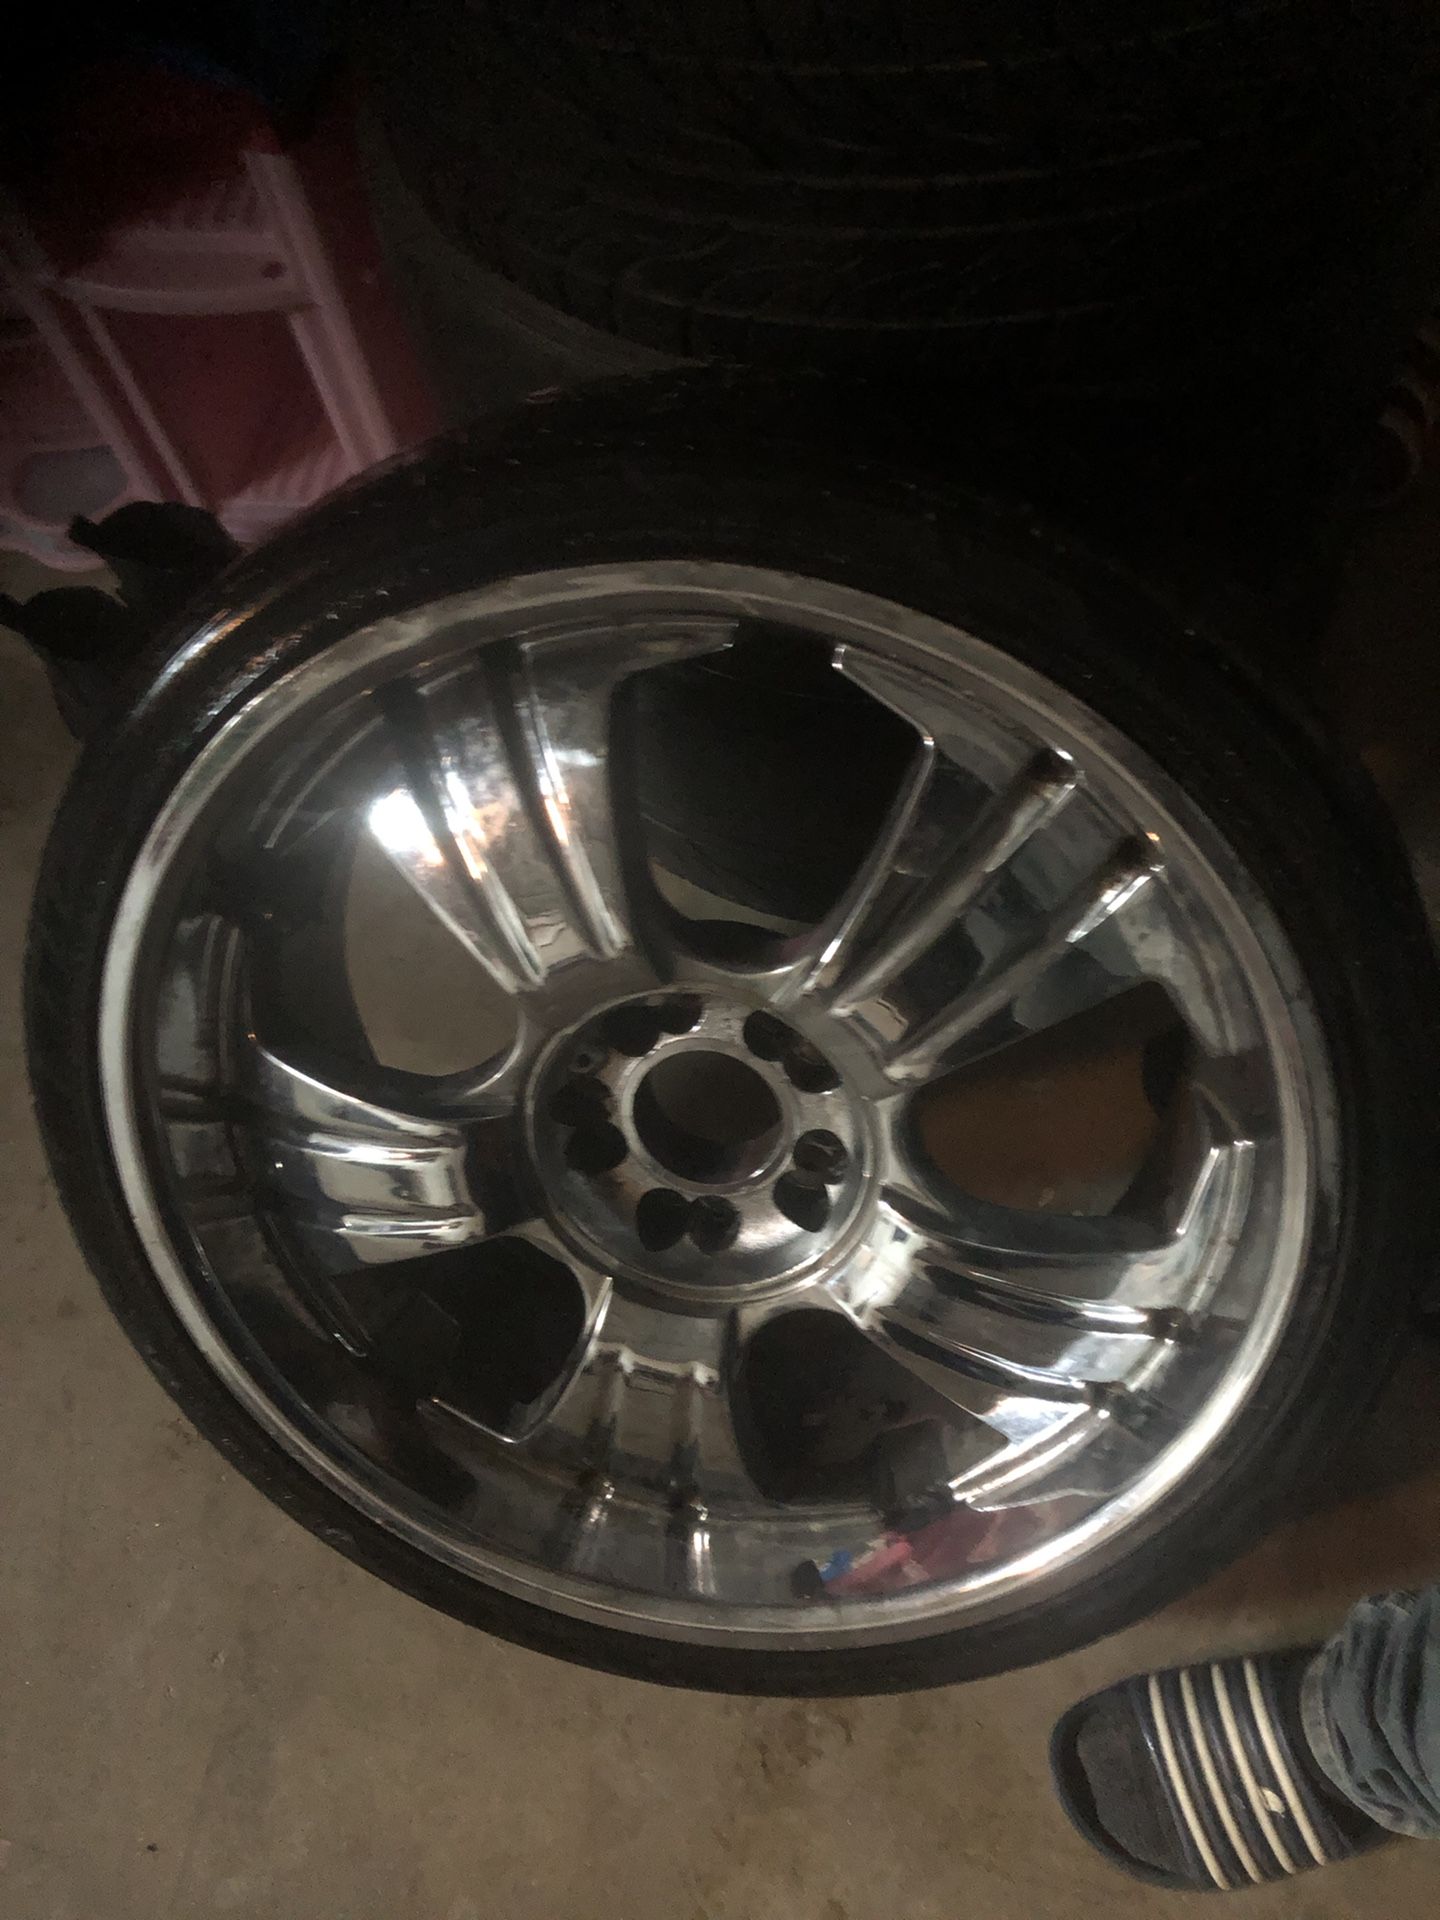 UNiversal rims I had them on a Nissan Altima asking 250 tires are 70 percent good